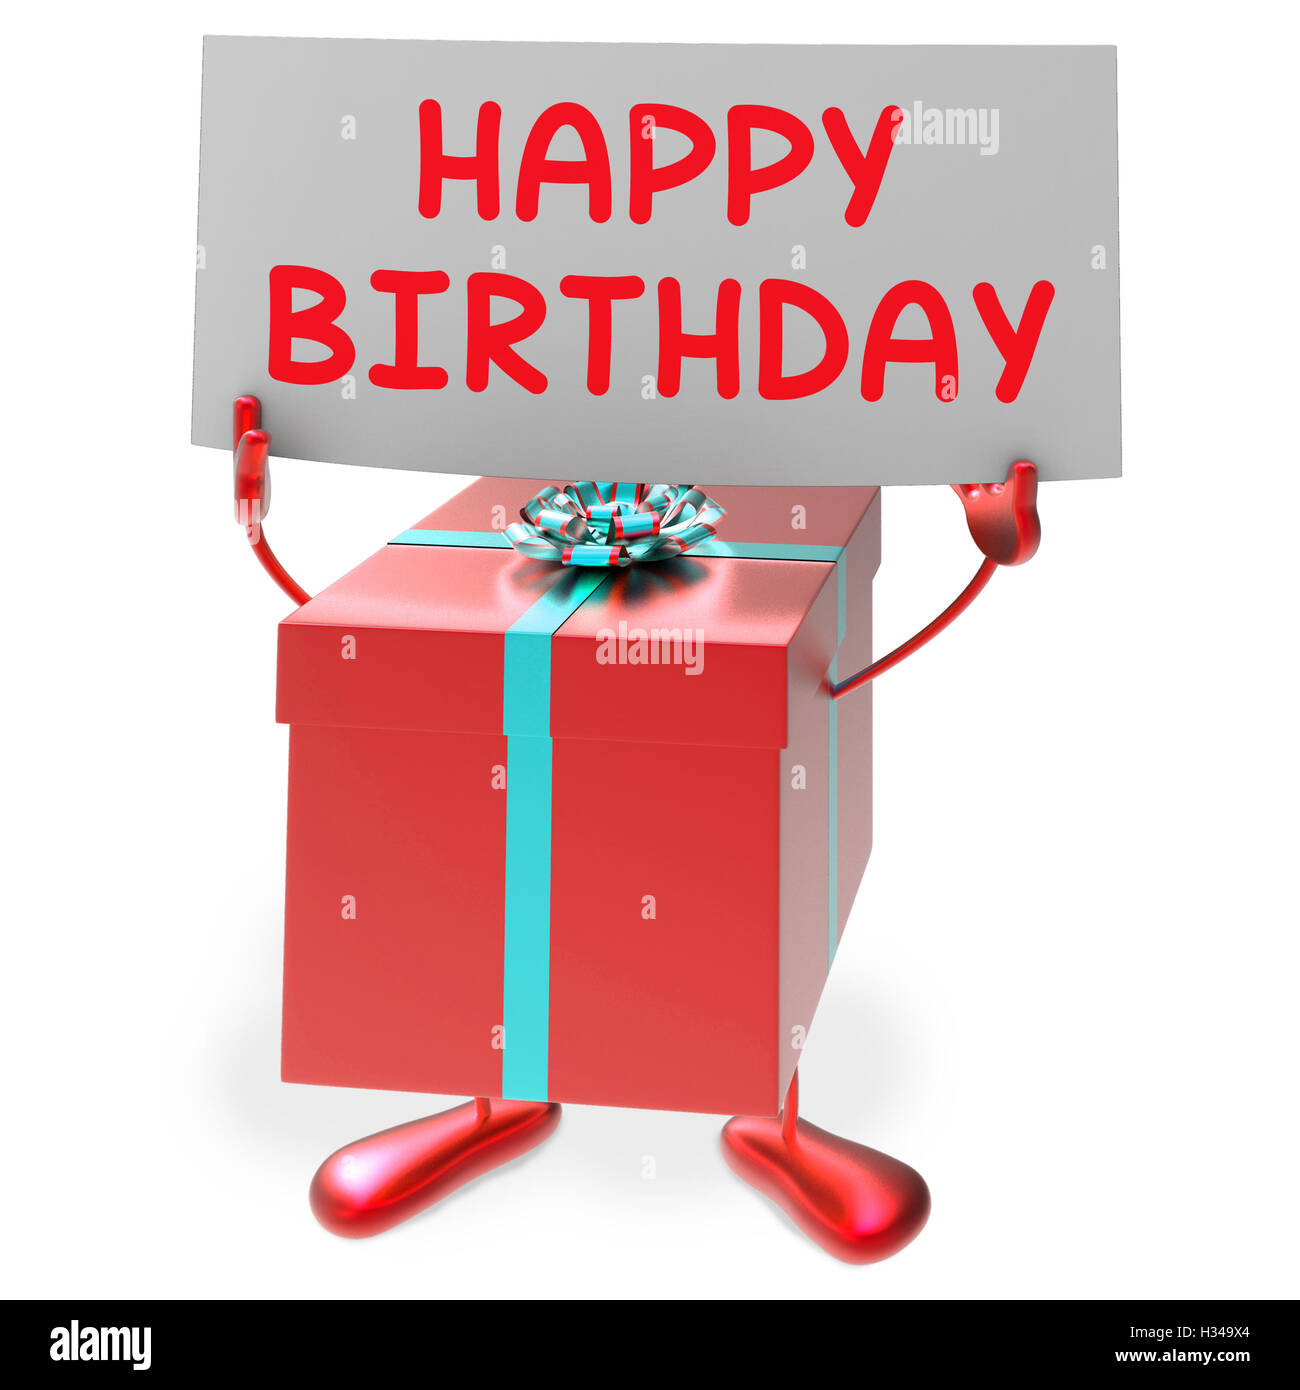 Happy Birthday Sign Means Presents and Gifts Stock Photo